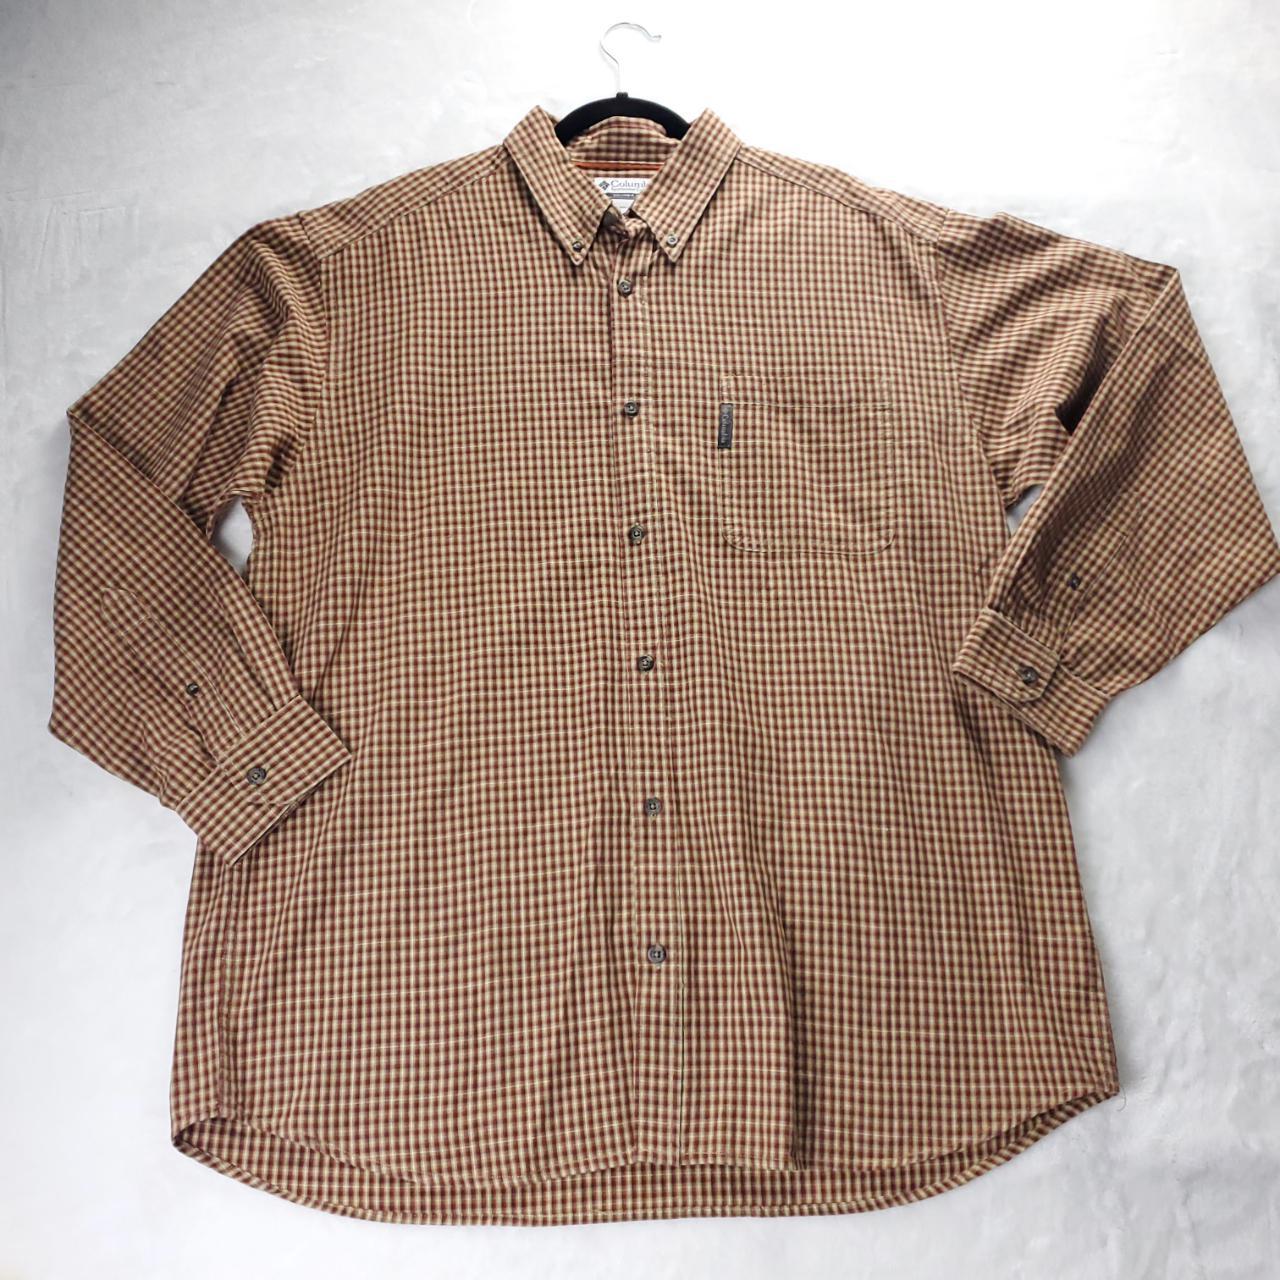 Product Image 1 - VINTAGE Columbia Sportswear Button Shirt